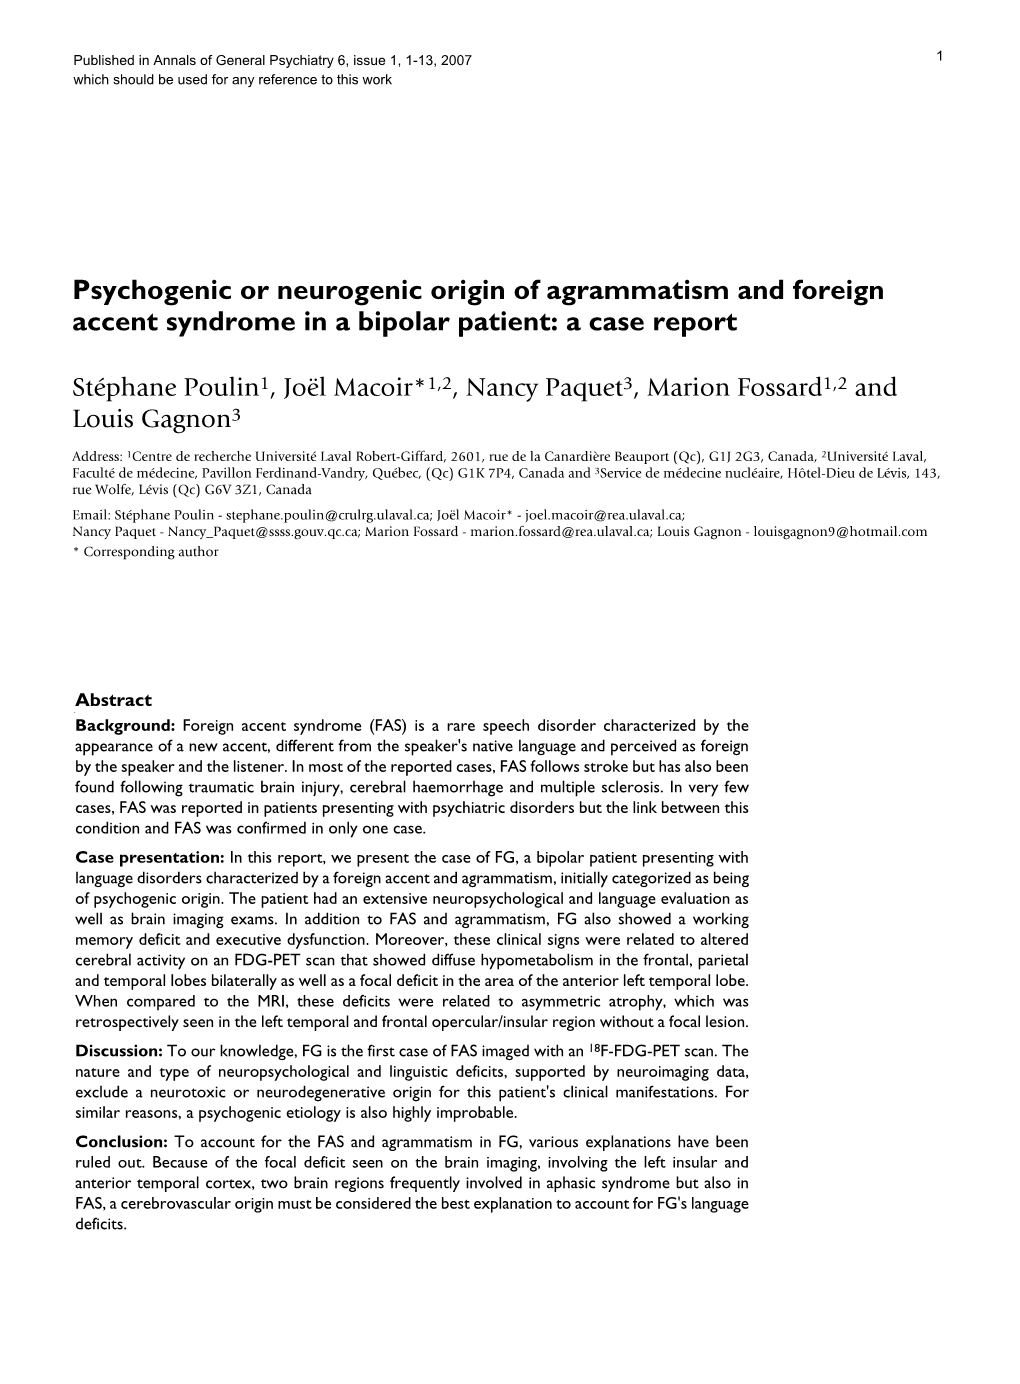 Psychogenic Or Neurogenic Origin of Agrammatism and Foreign Accent Syndrome in a Bipolar Patient: a Case Report